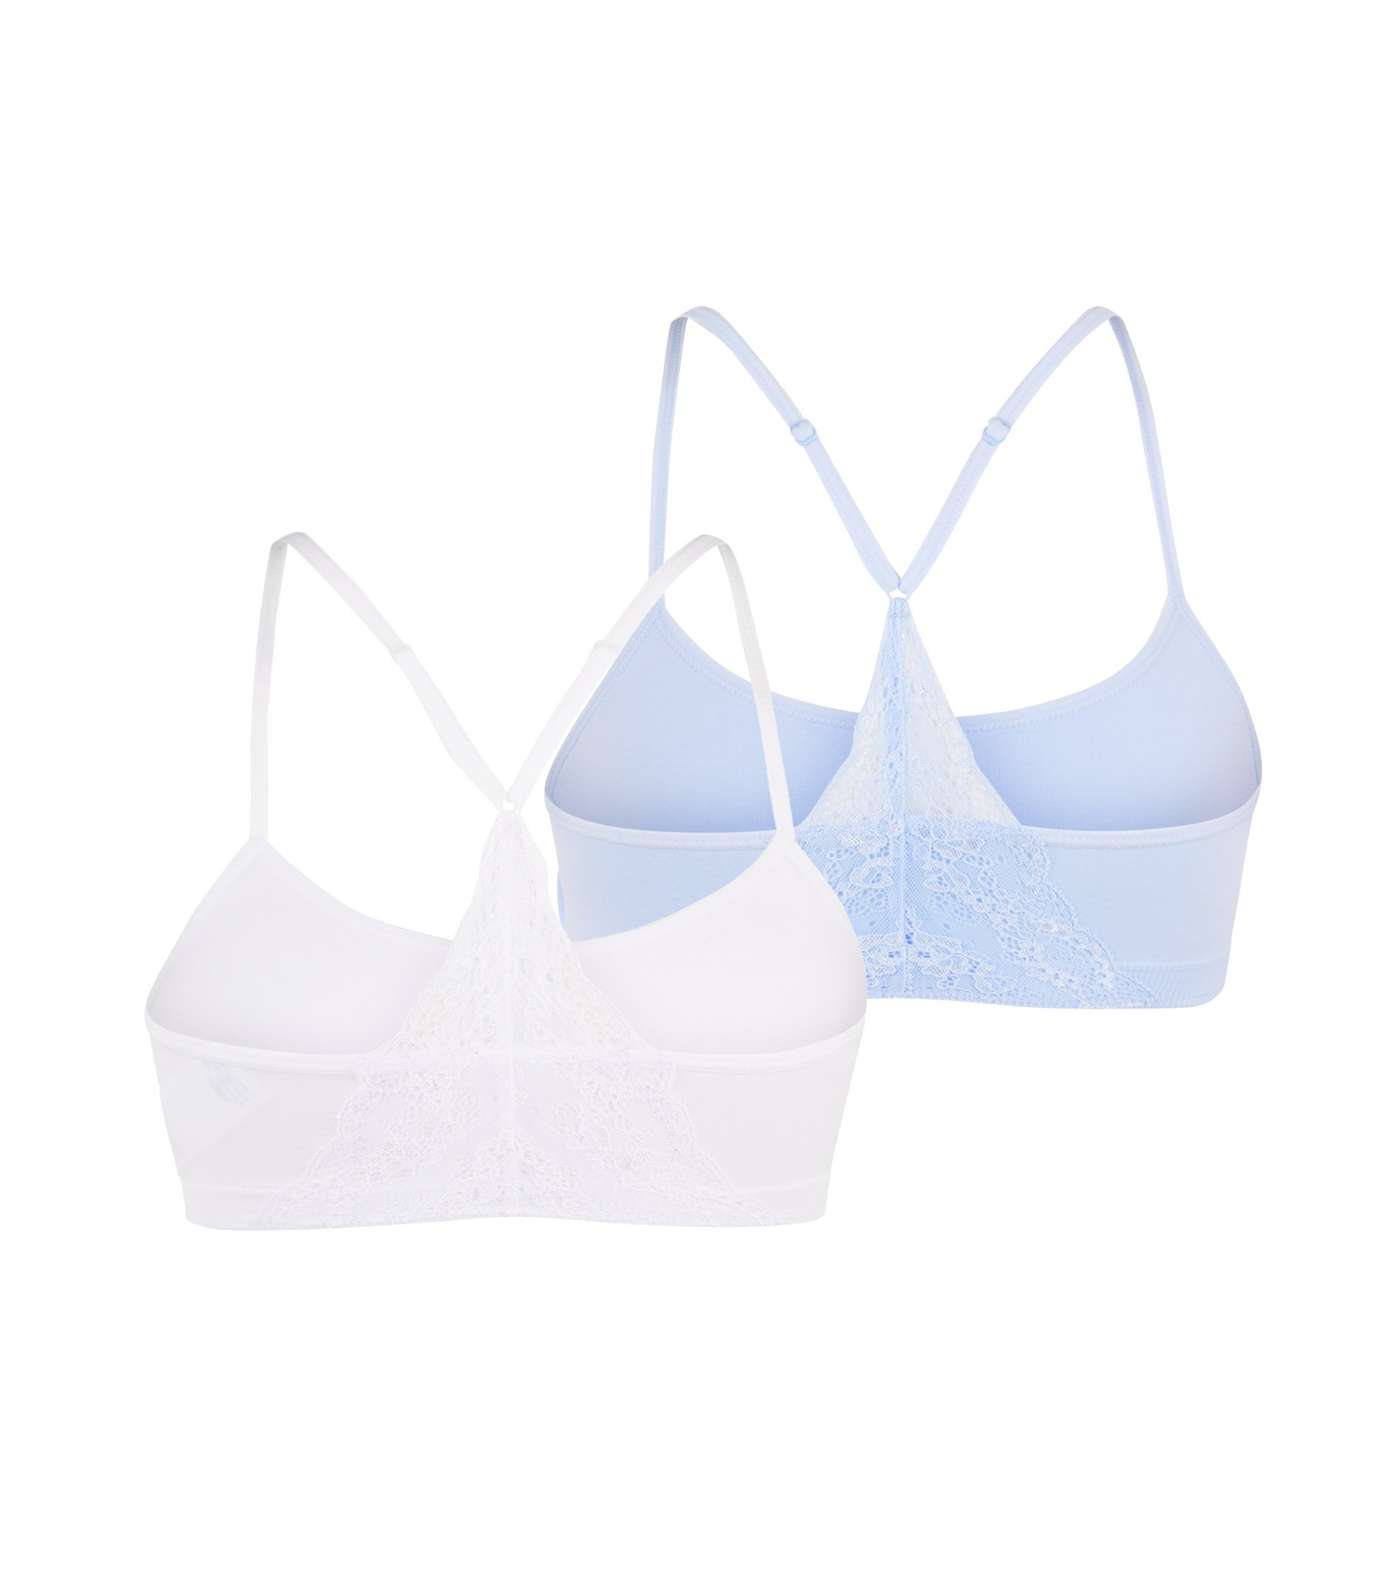 Girls 2 Pack Pale Blue and White Lace Trim Crop Tops Image 2